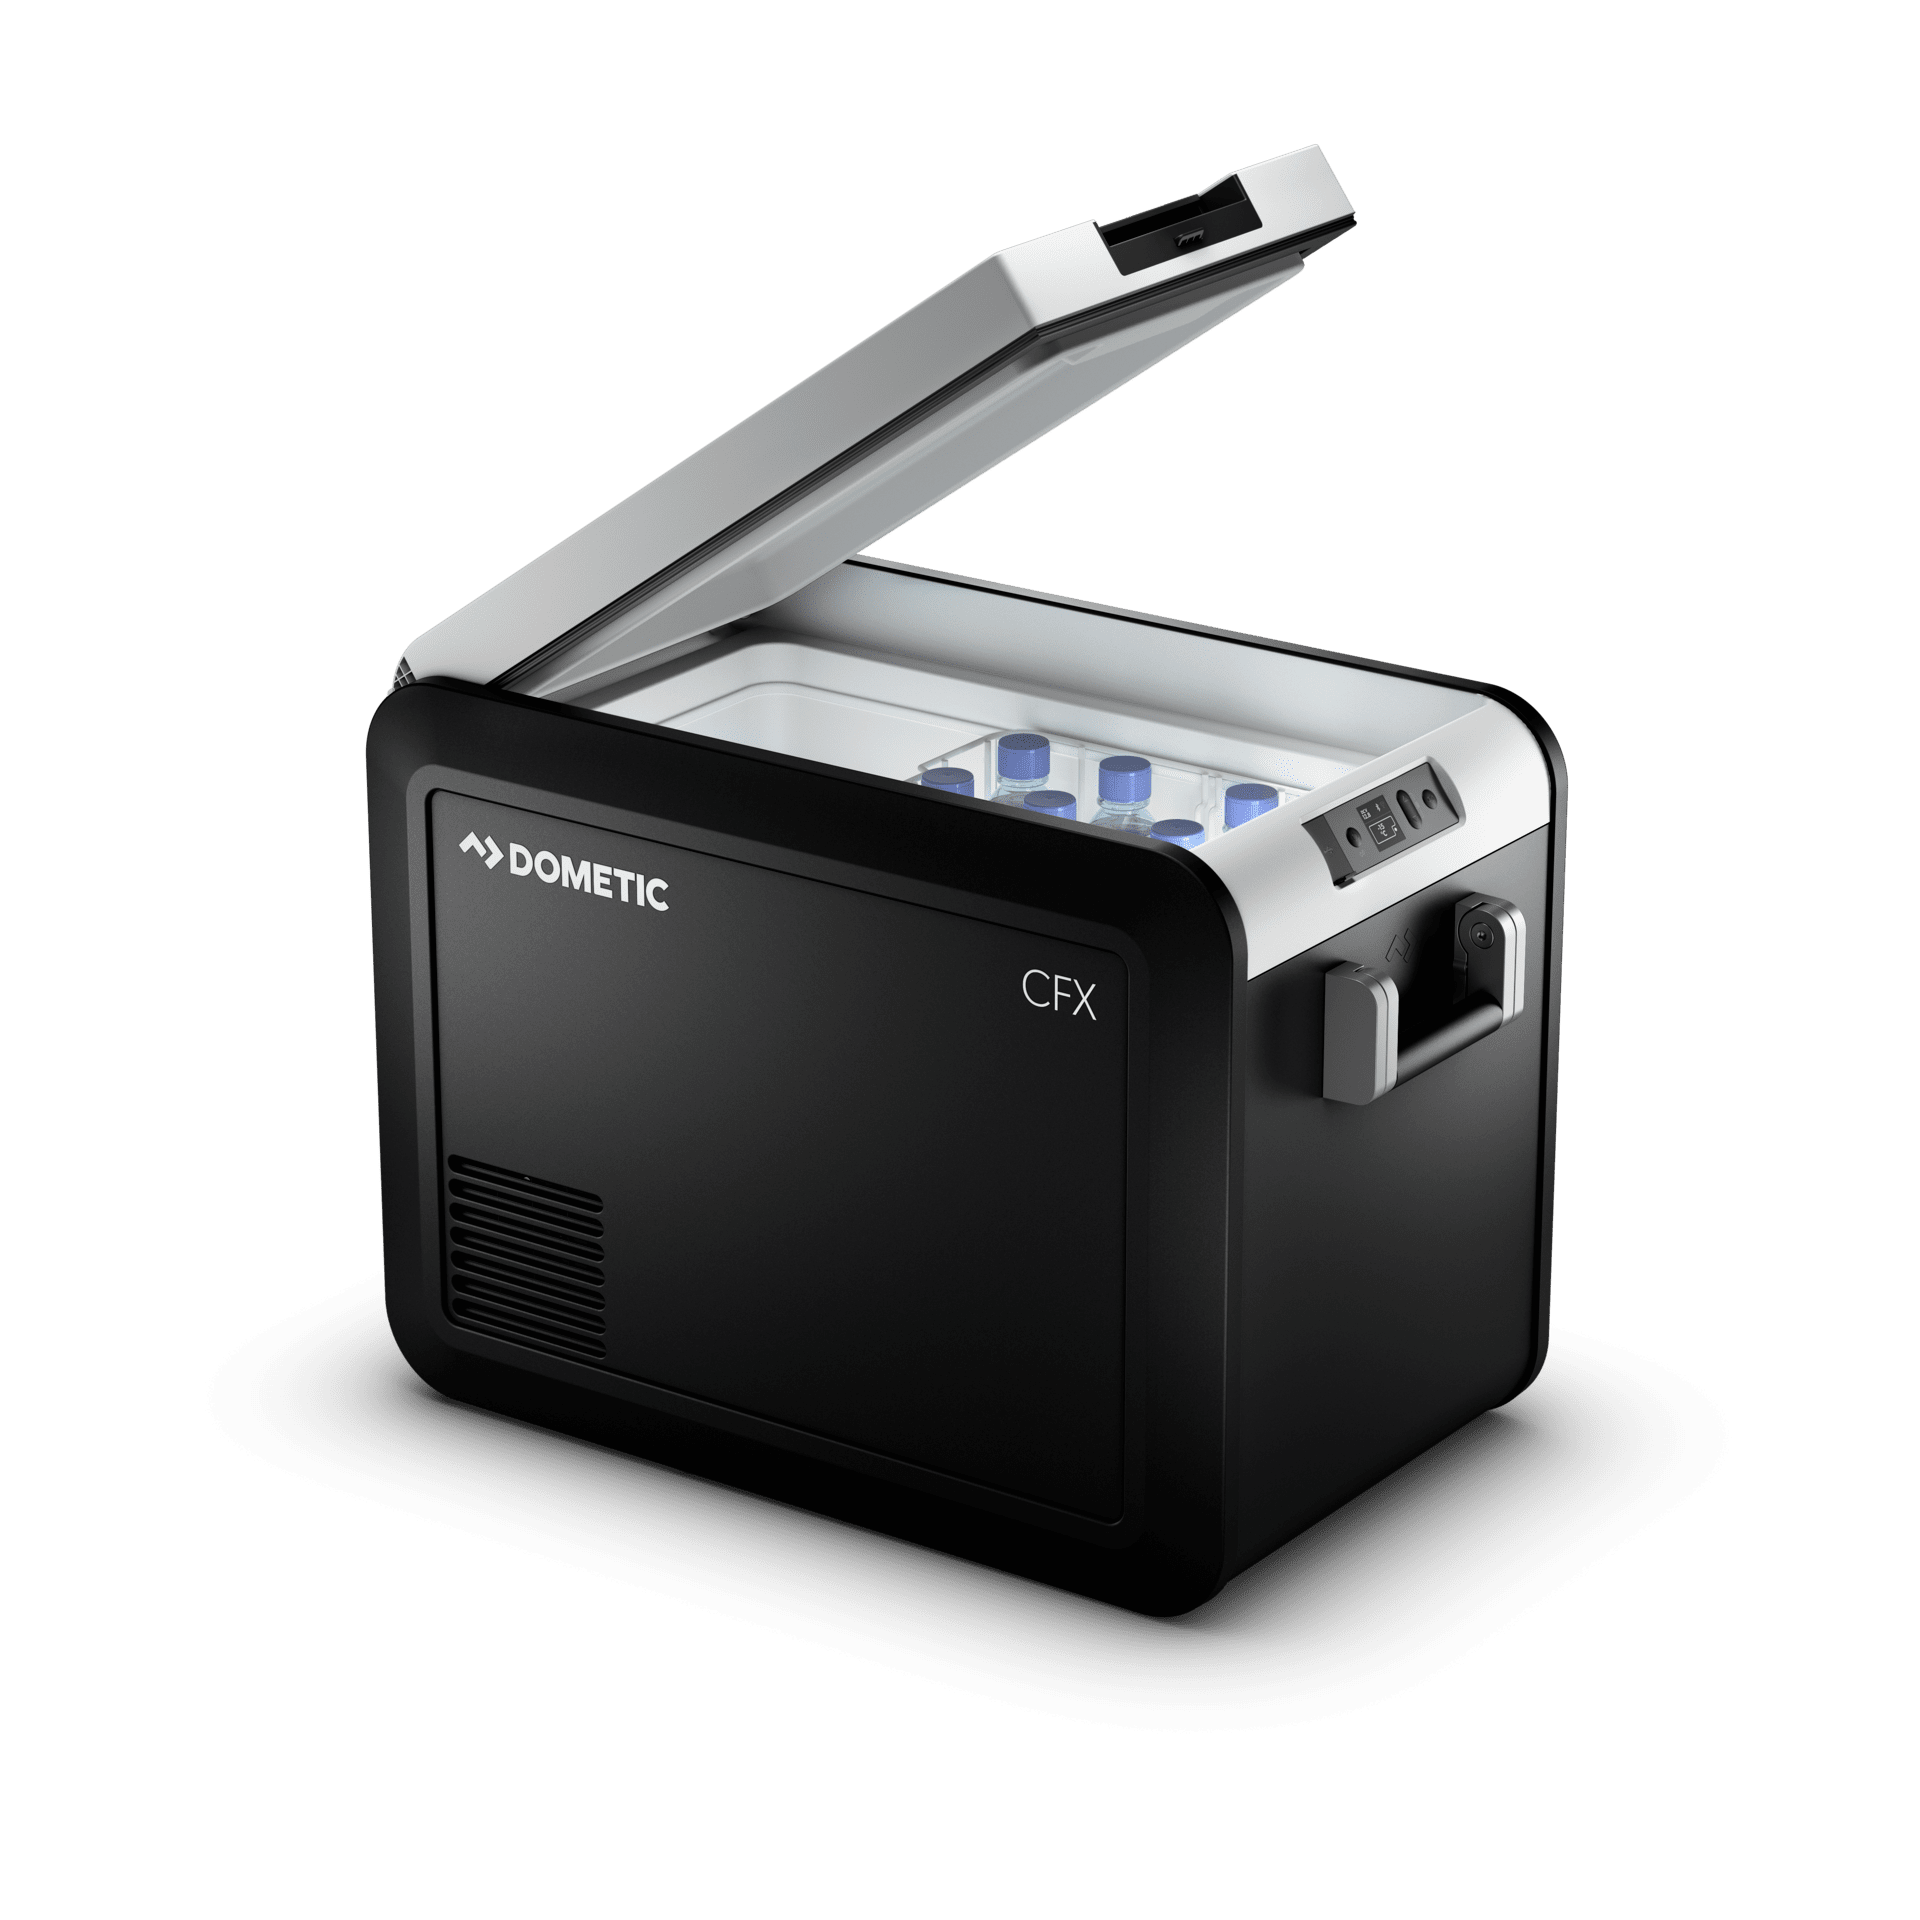 Dometic CFX3 45 Powered Cooler